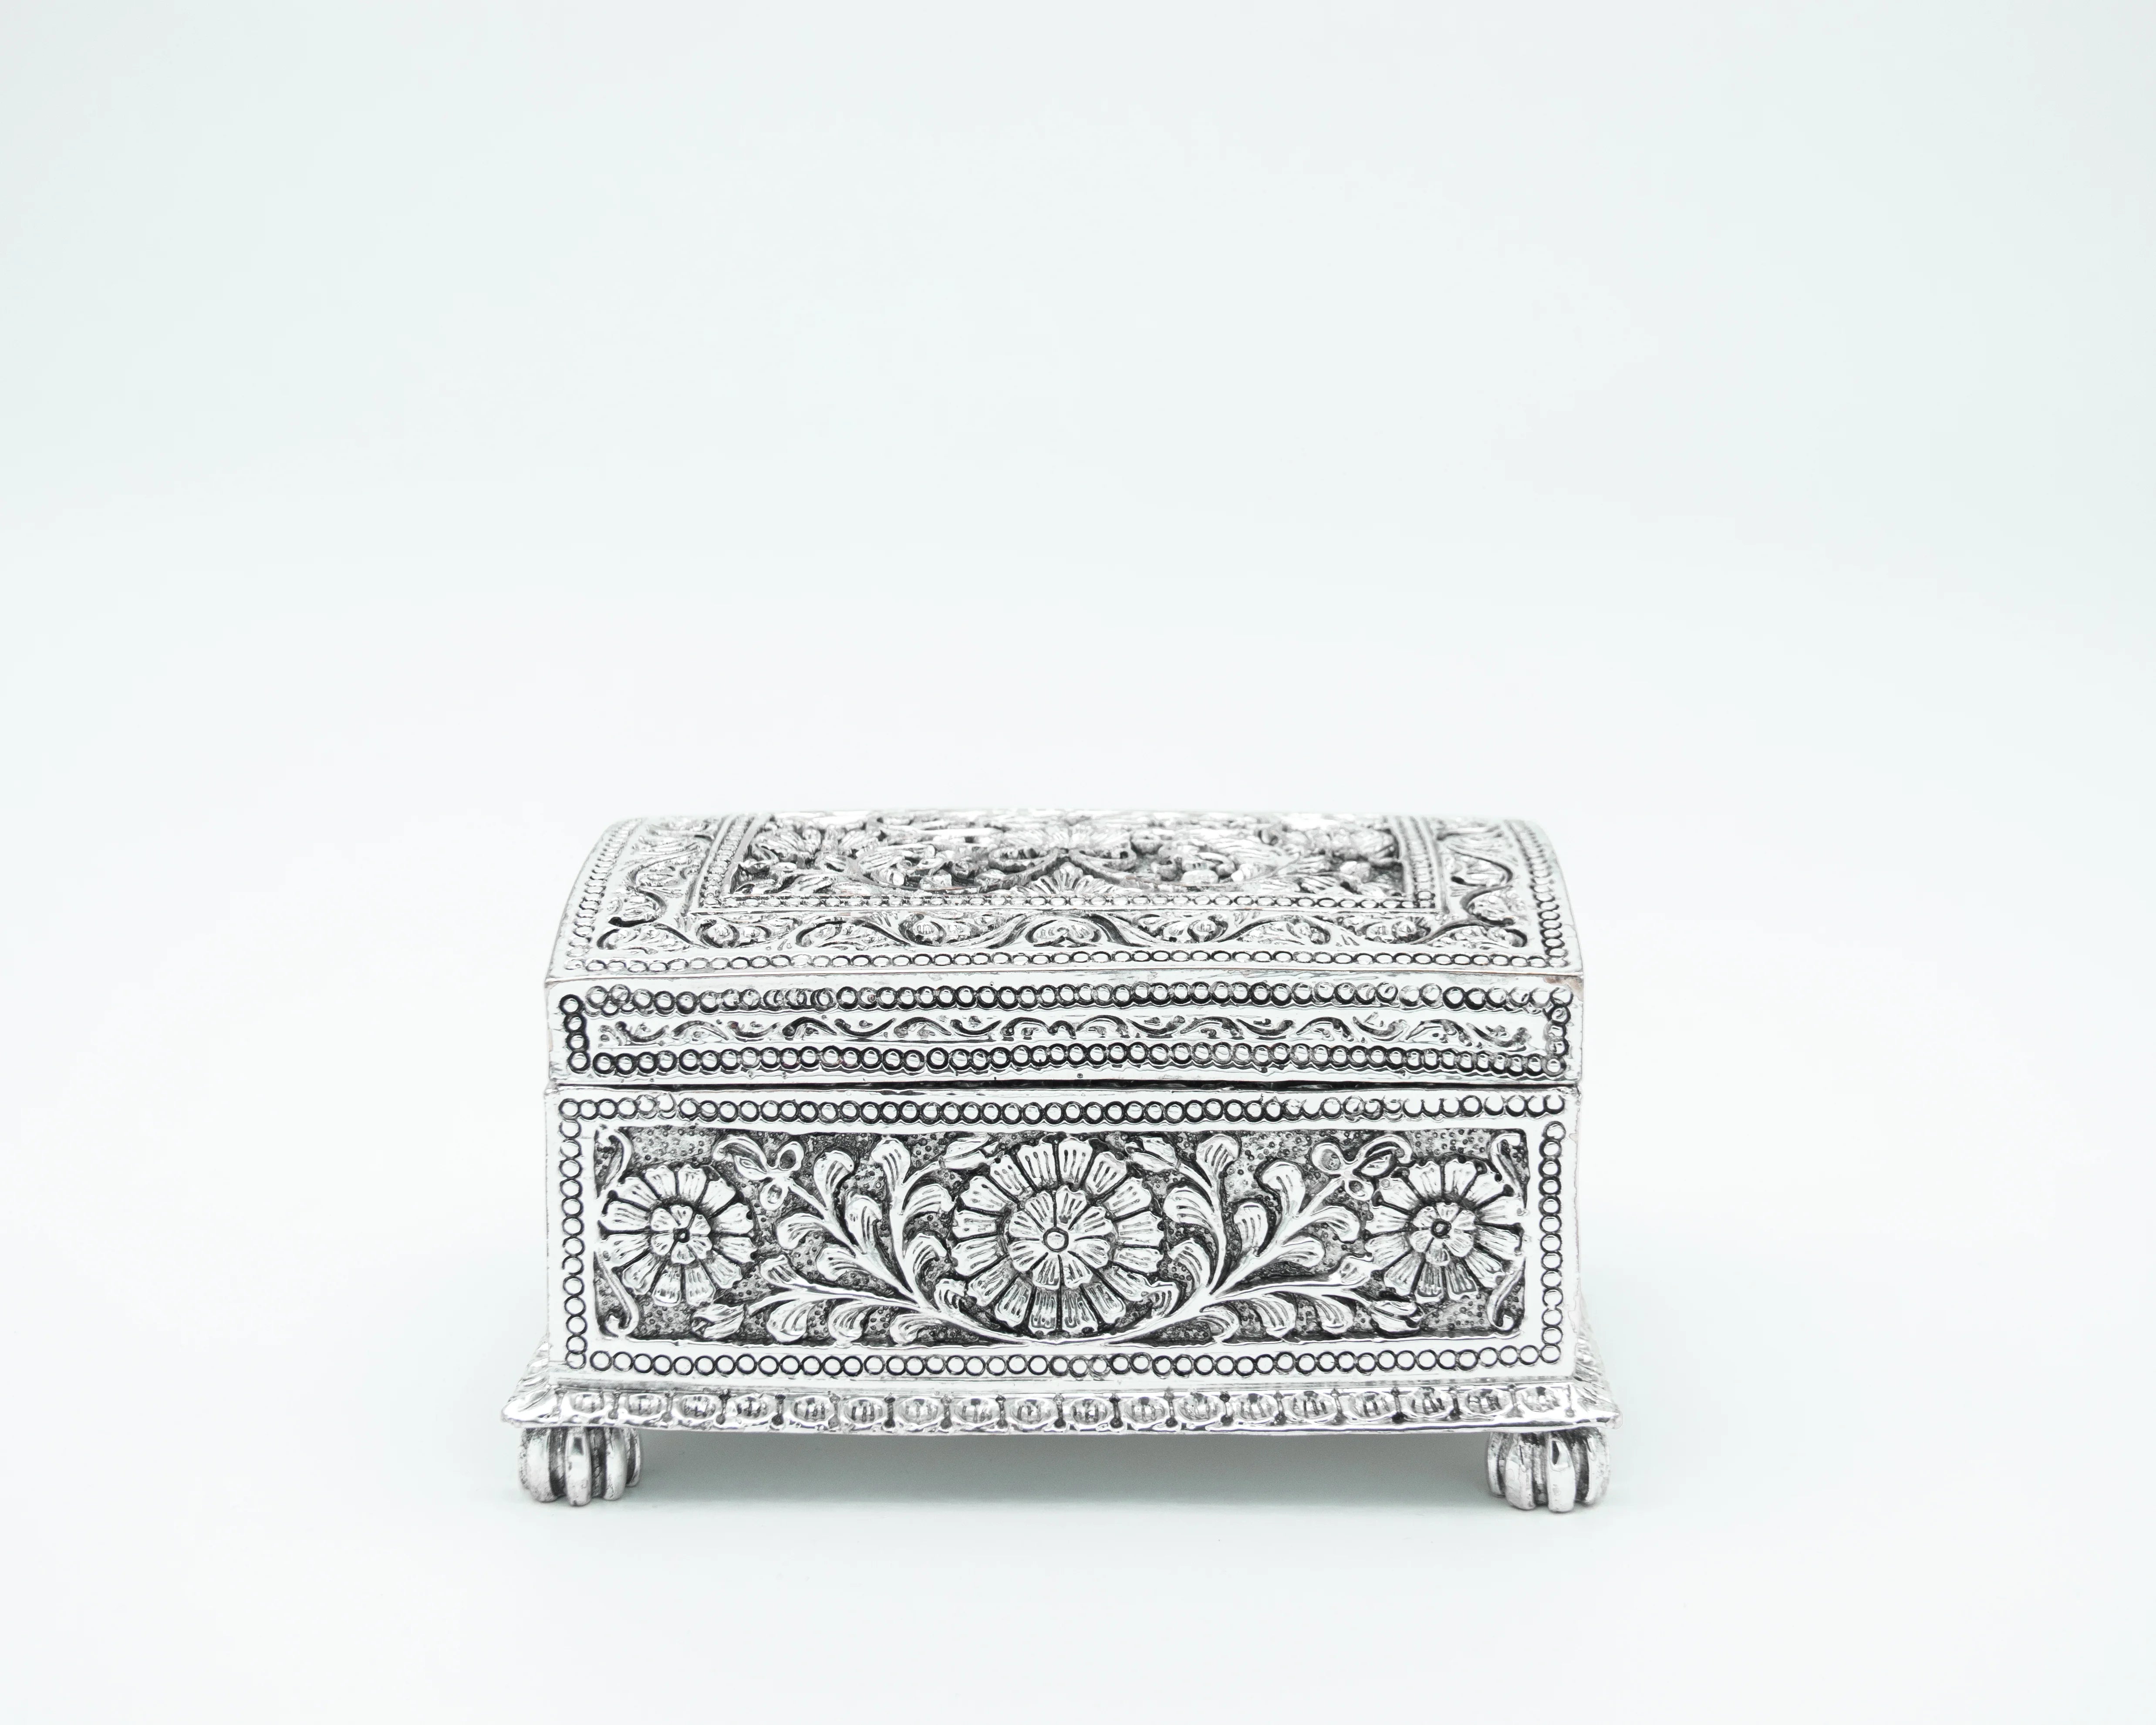 Luxurious Silver Plated Jewelry Box | Artisan Crafted Resin Box